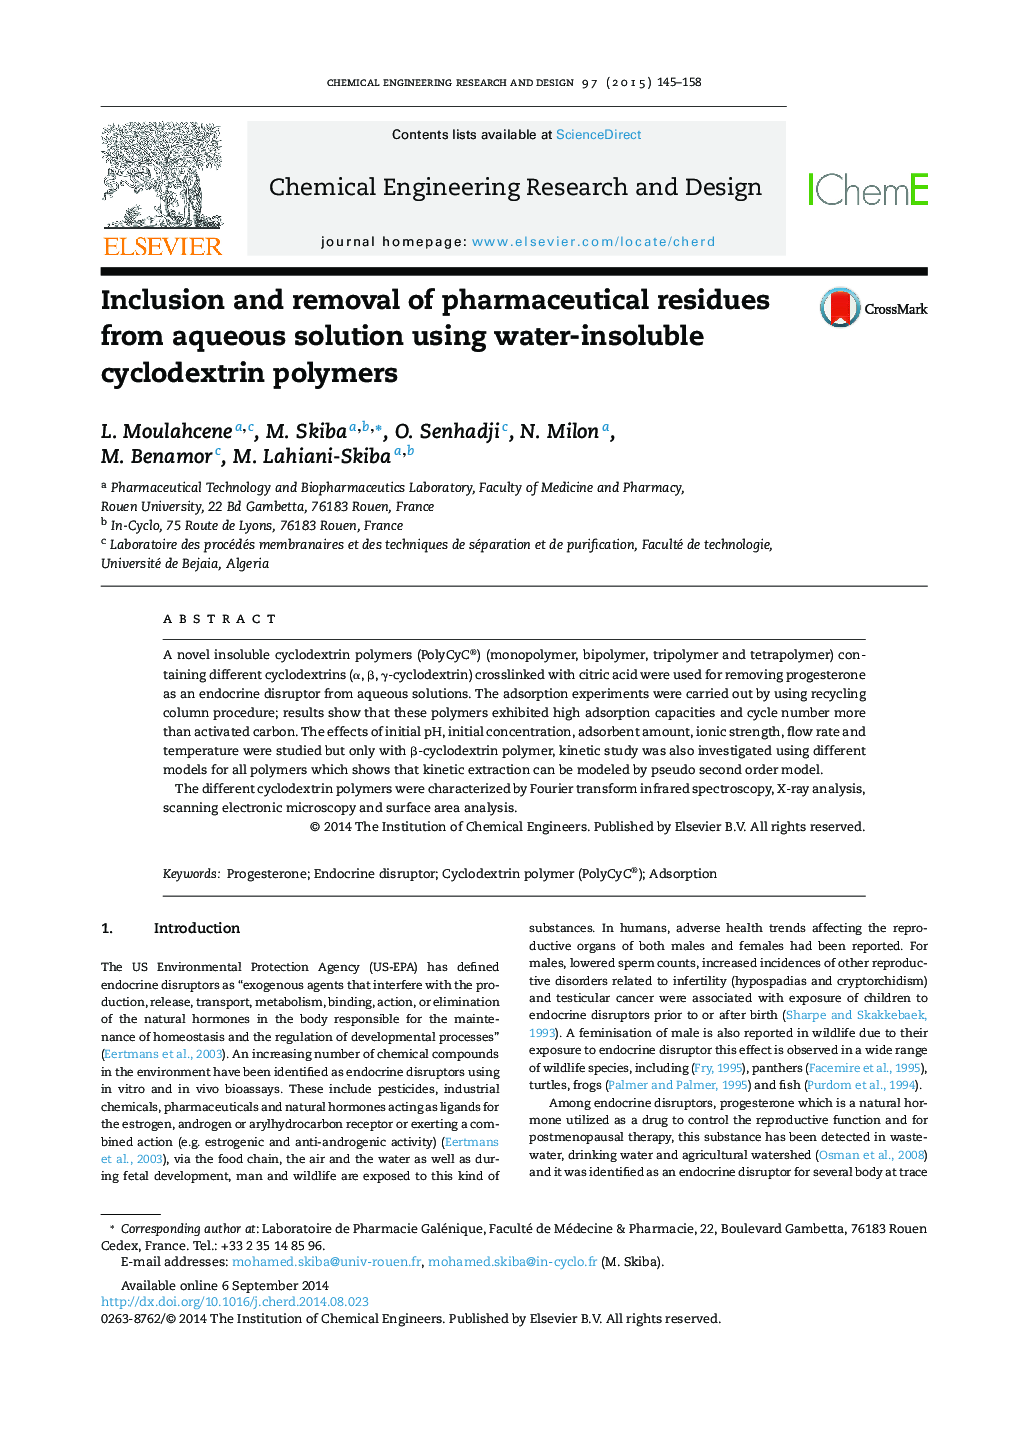 Inclusion and removal of pharmaceutical residues from aqueous solution using water-insoluble cyclodextrin polymers